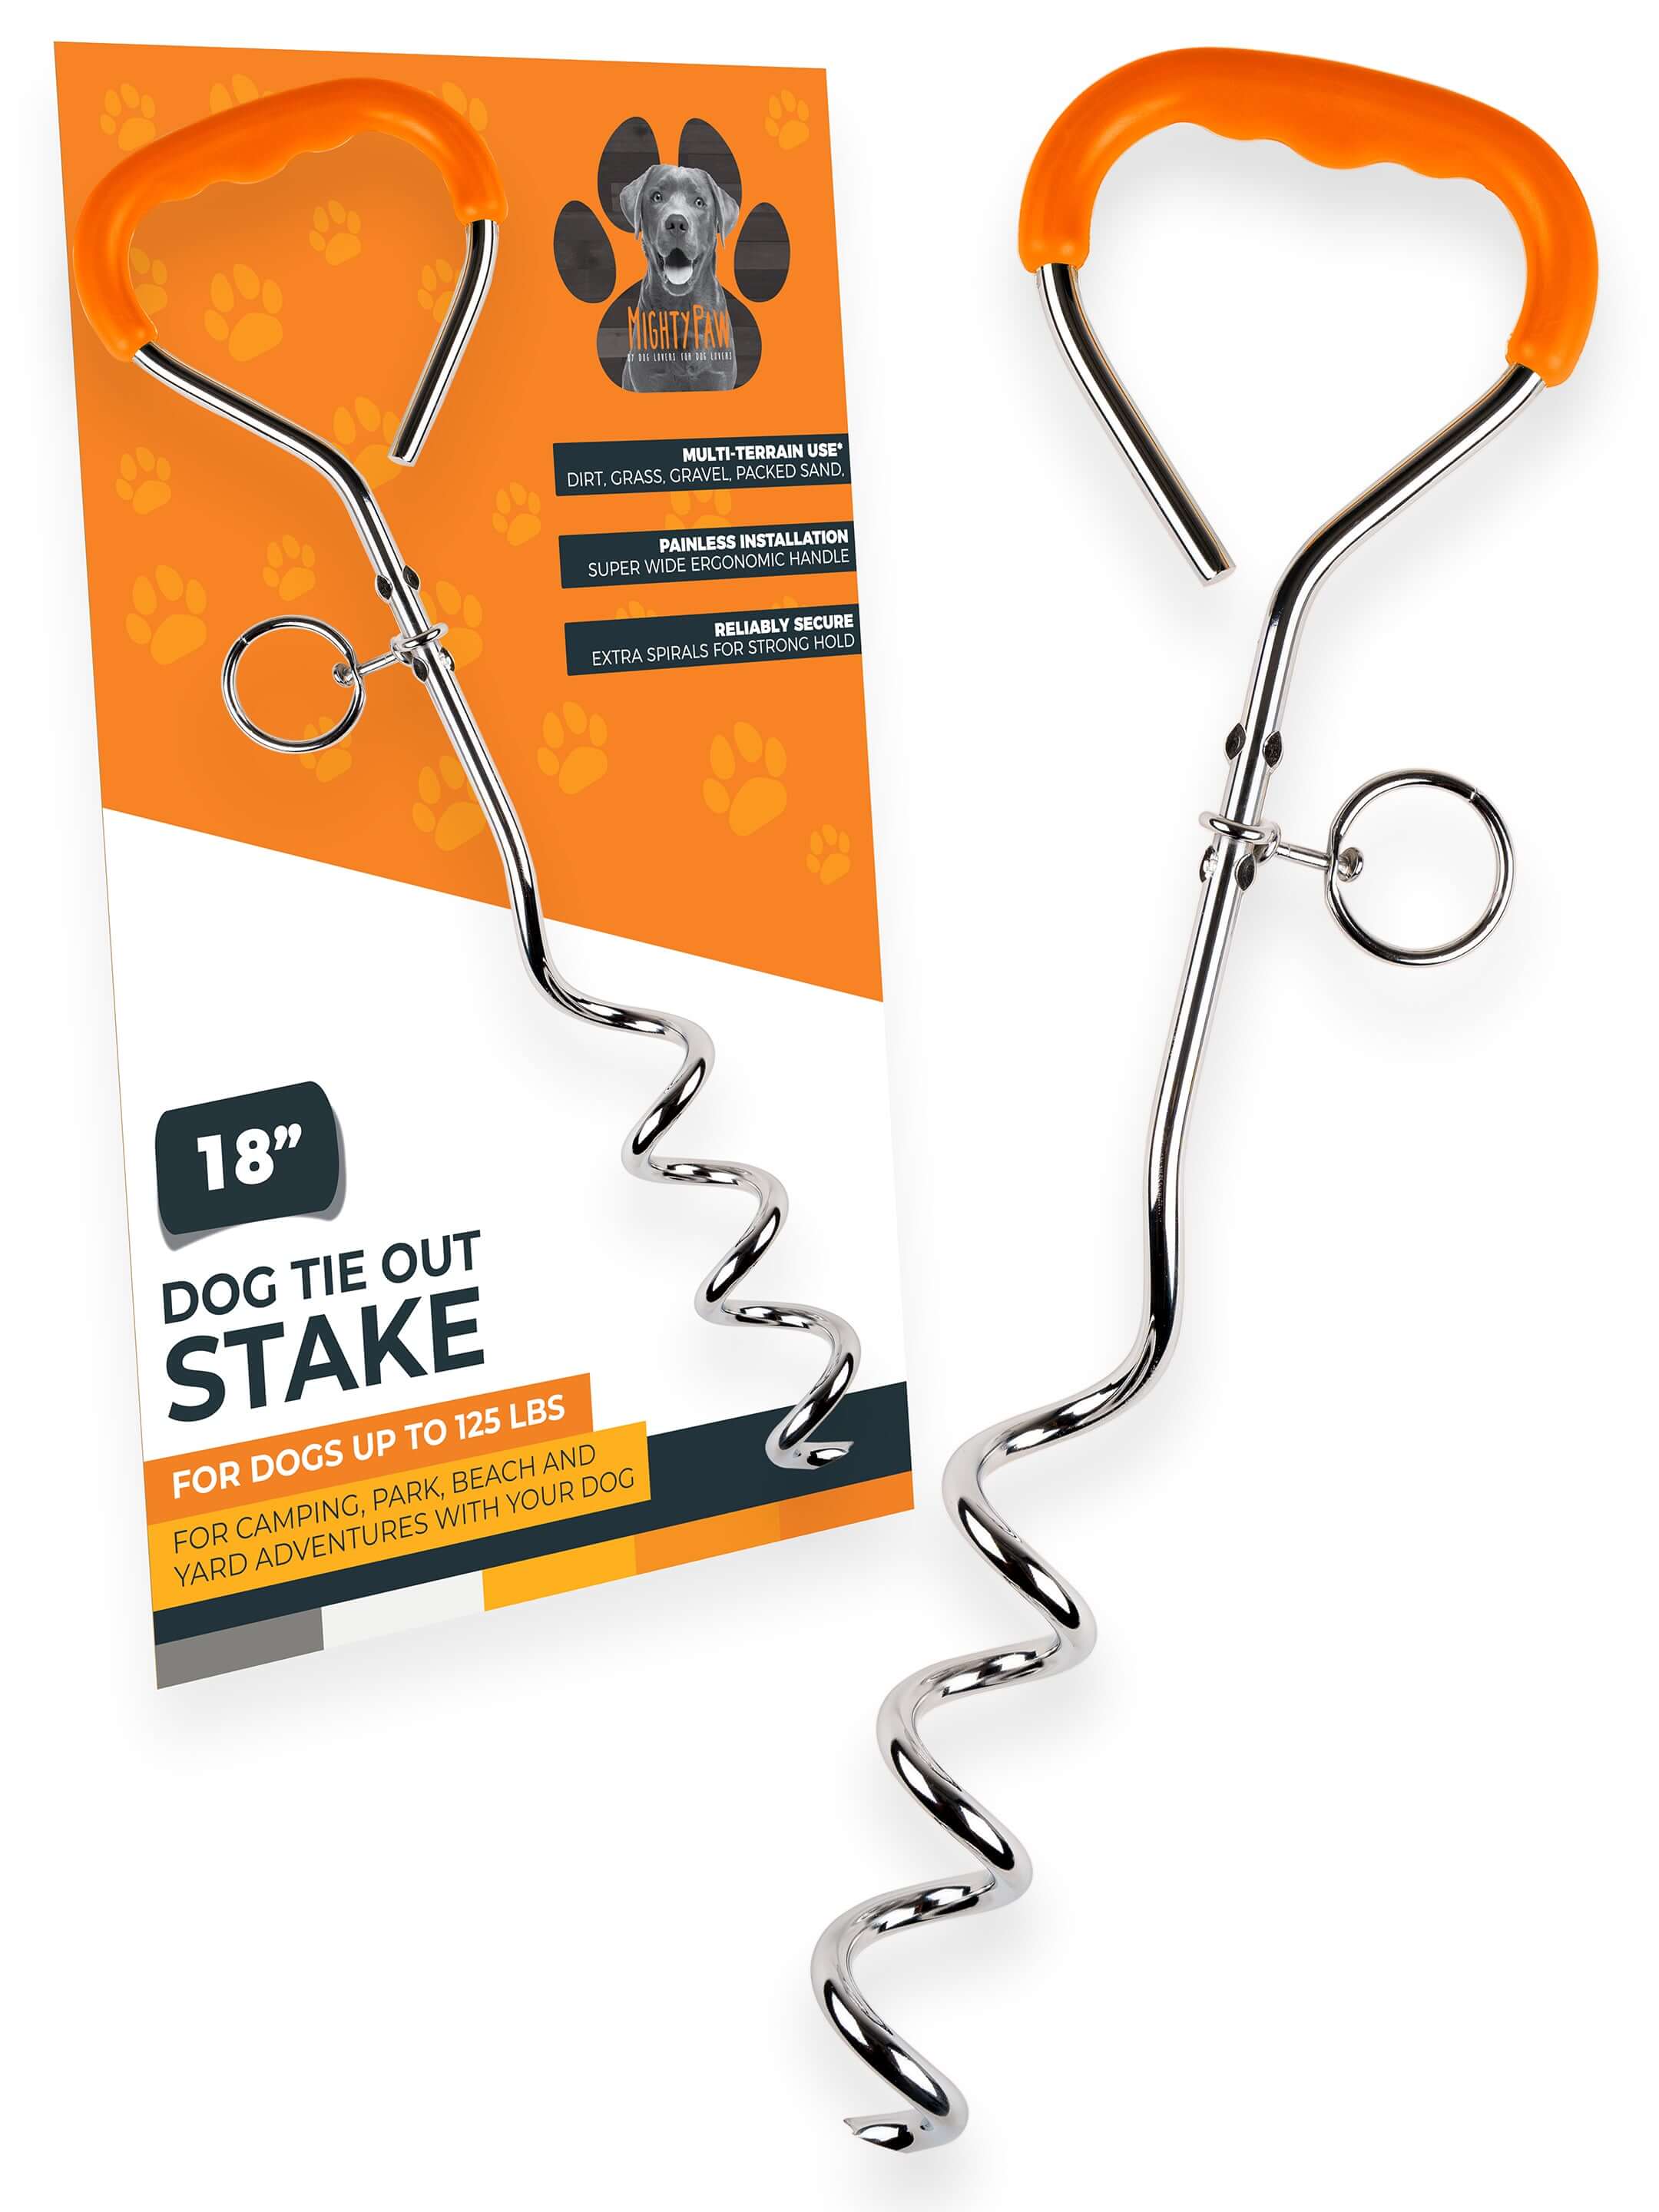 Mighty Paw Heavy-Duty Dog Tie Out Stake for Outdoor Safety